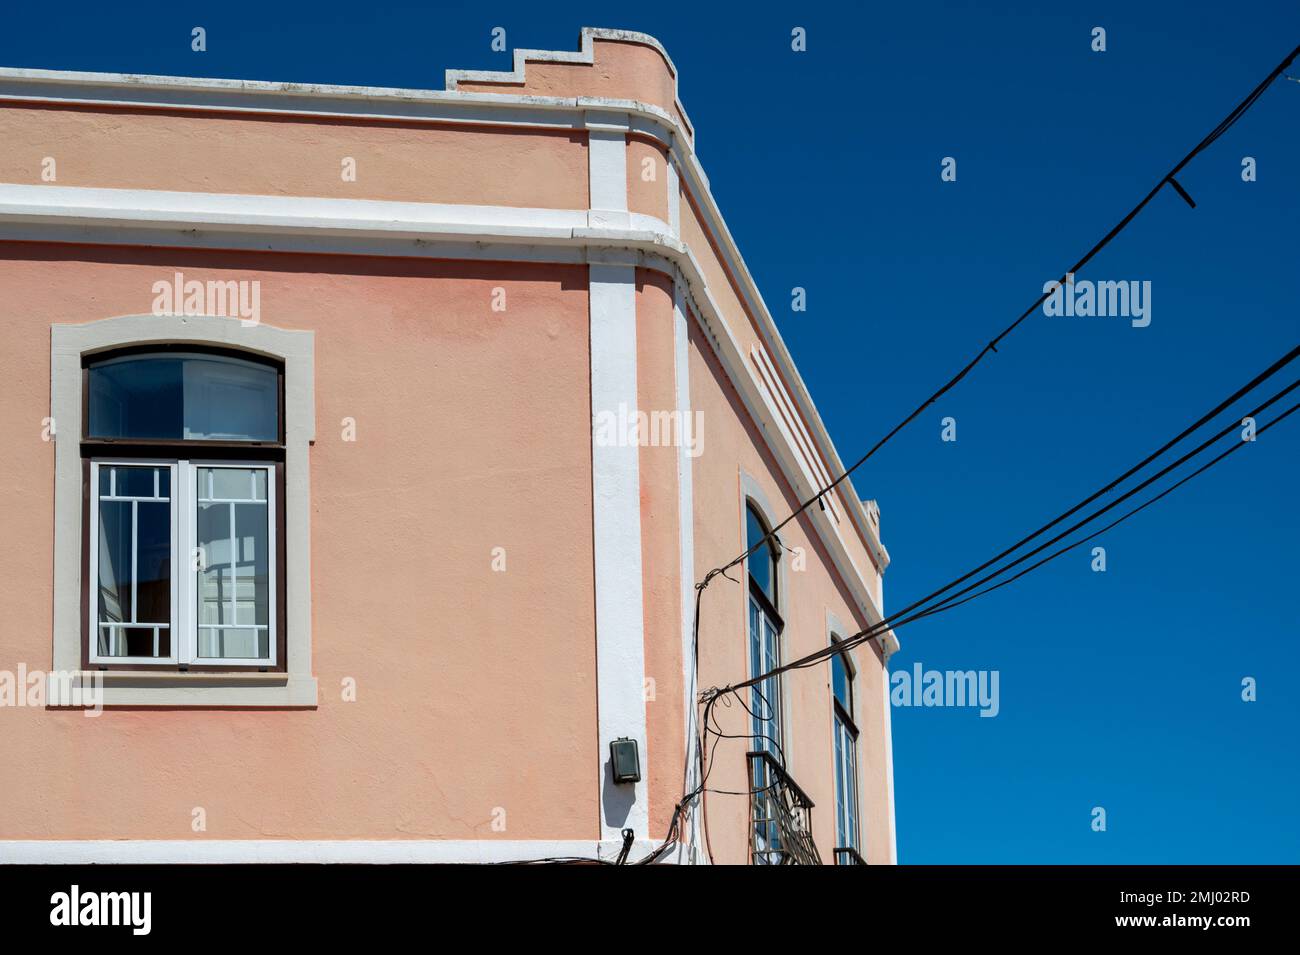 A terracotta painted traditional building in LagosAlagarve Portugal Stock Photo